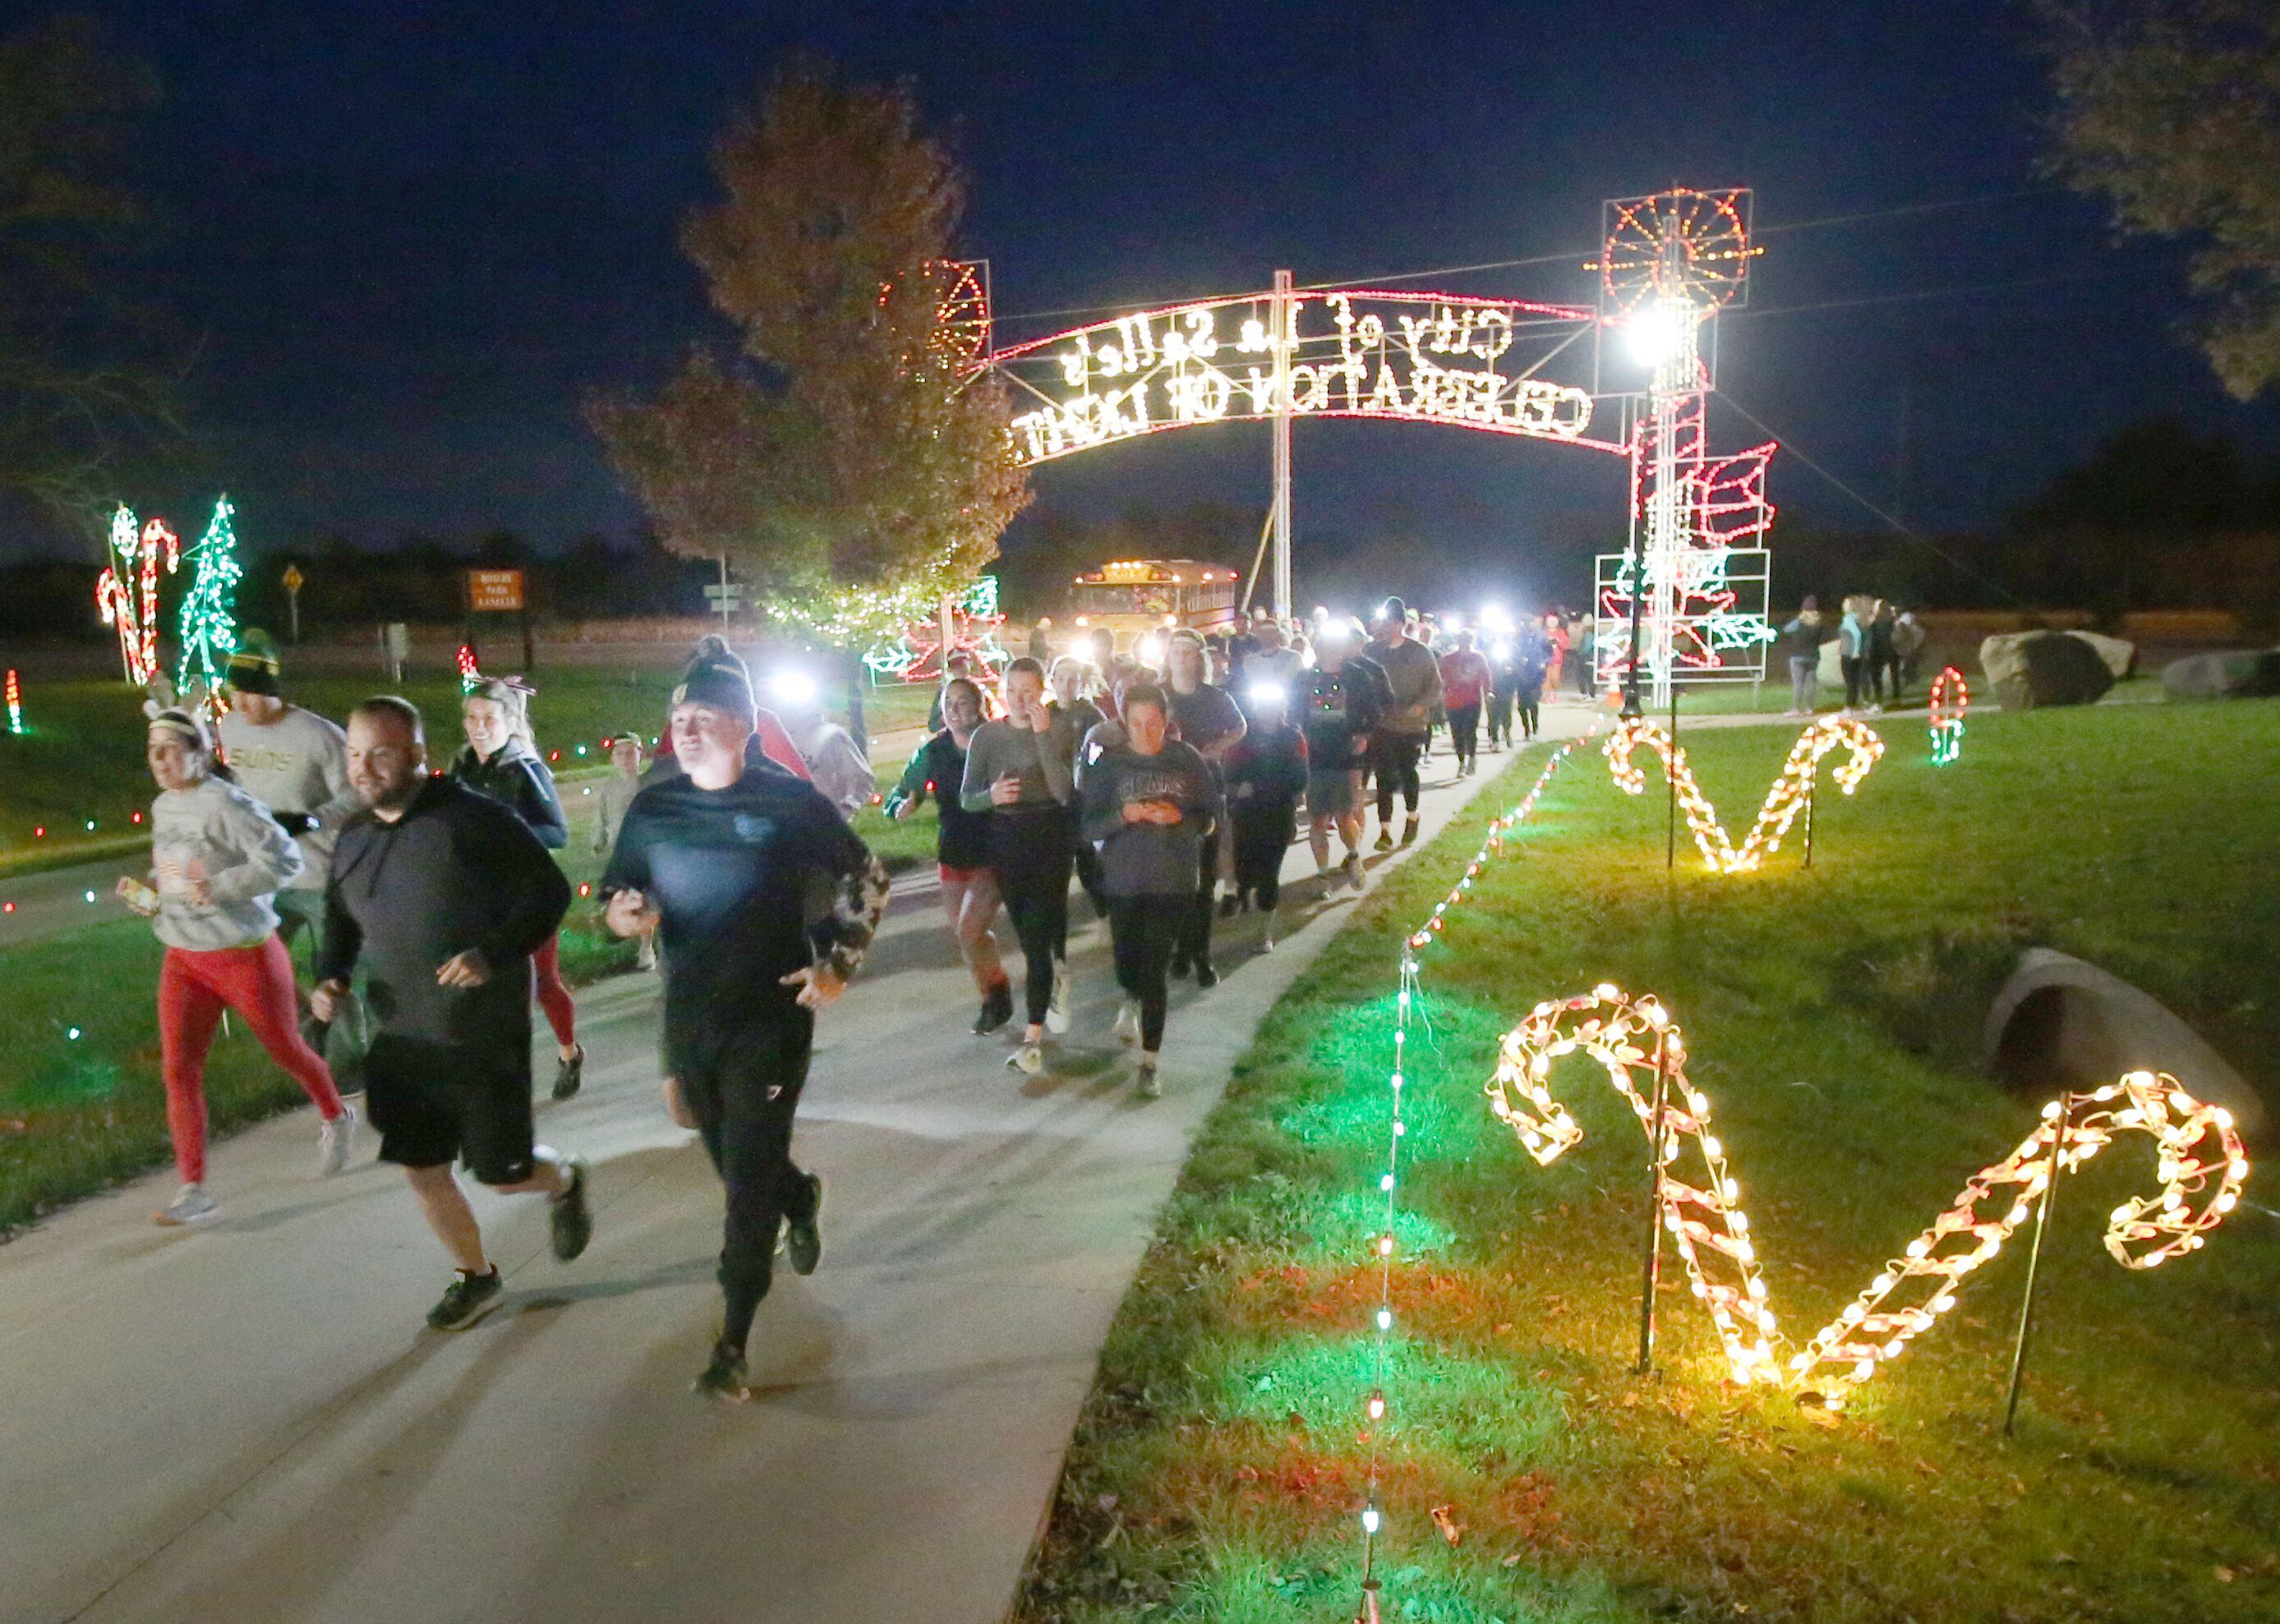 Hundreds of people Hundreds  participated in the Run Run Rudolph 5K Fun Run on Sunday, Nov. 5, 2023 at Rotary Park in La Salle. The Celebration Of Lights is the area’s largest drive-thru Christmas light display, stretching throughout Rotary Park on the east side of La Salle.